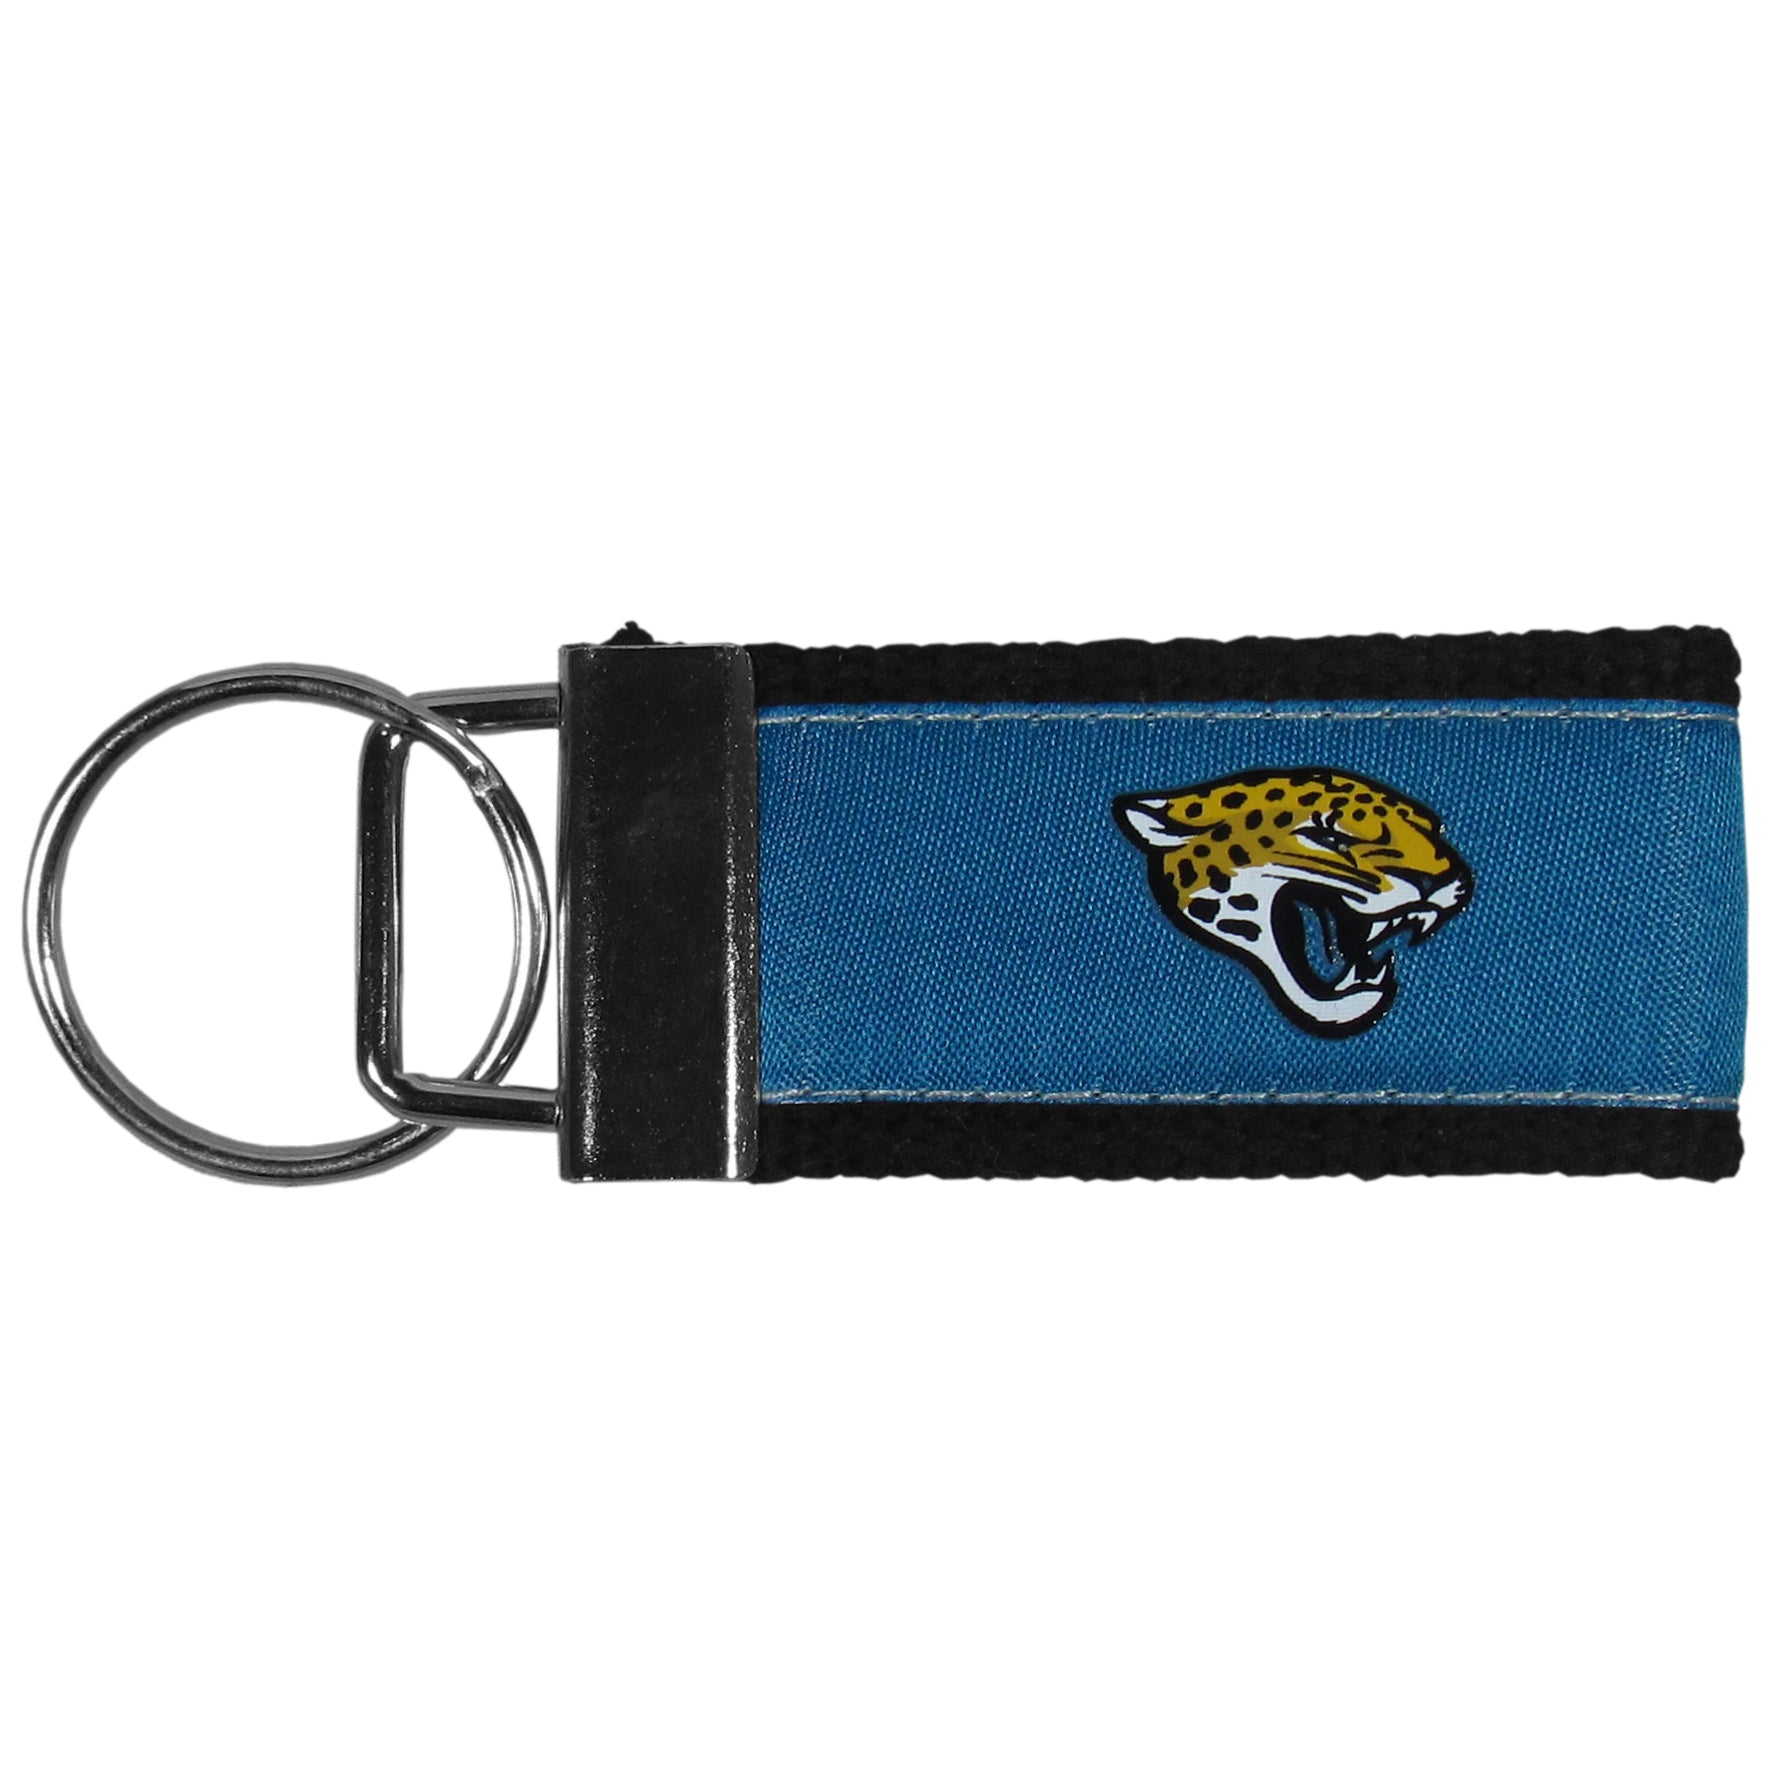  NHL Colorado Avalanche Lanyard with Detachable Buckle : Sports  Related Key Chains : Sports & Outdoors